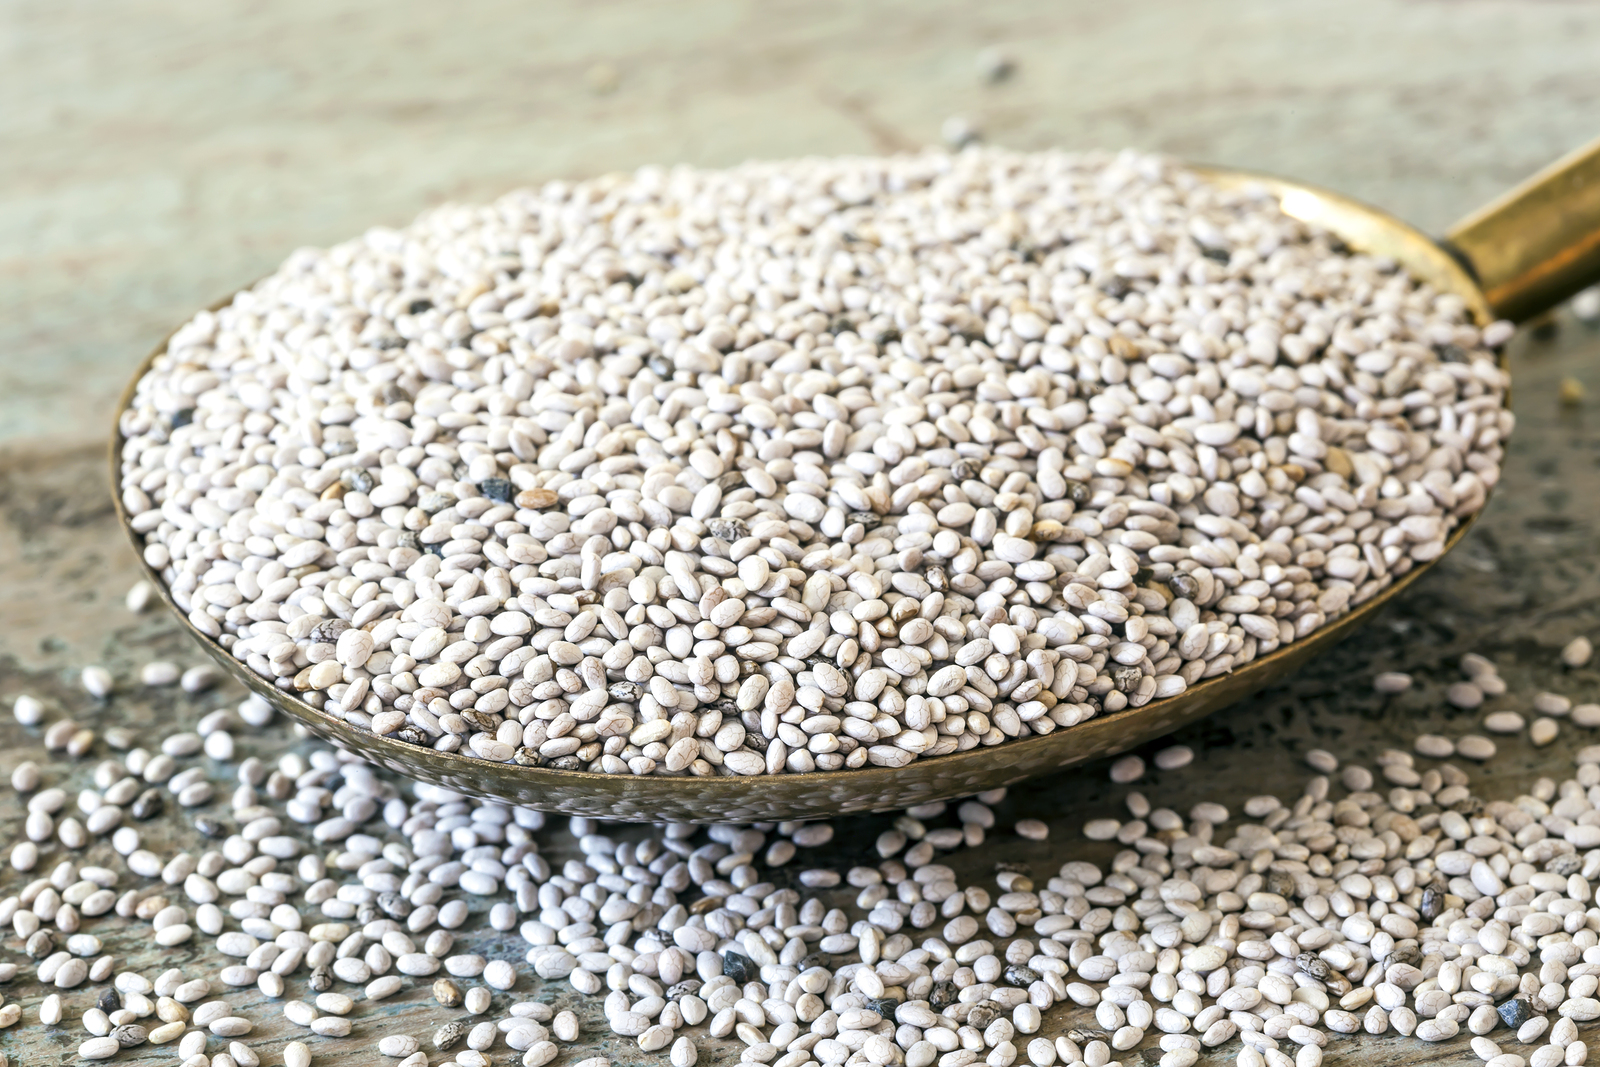 Add chia seeds to your protein smoothie for anti-inflammatory benefits.